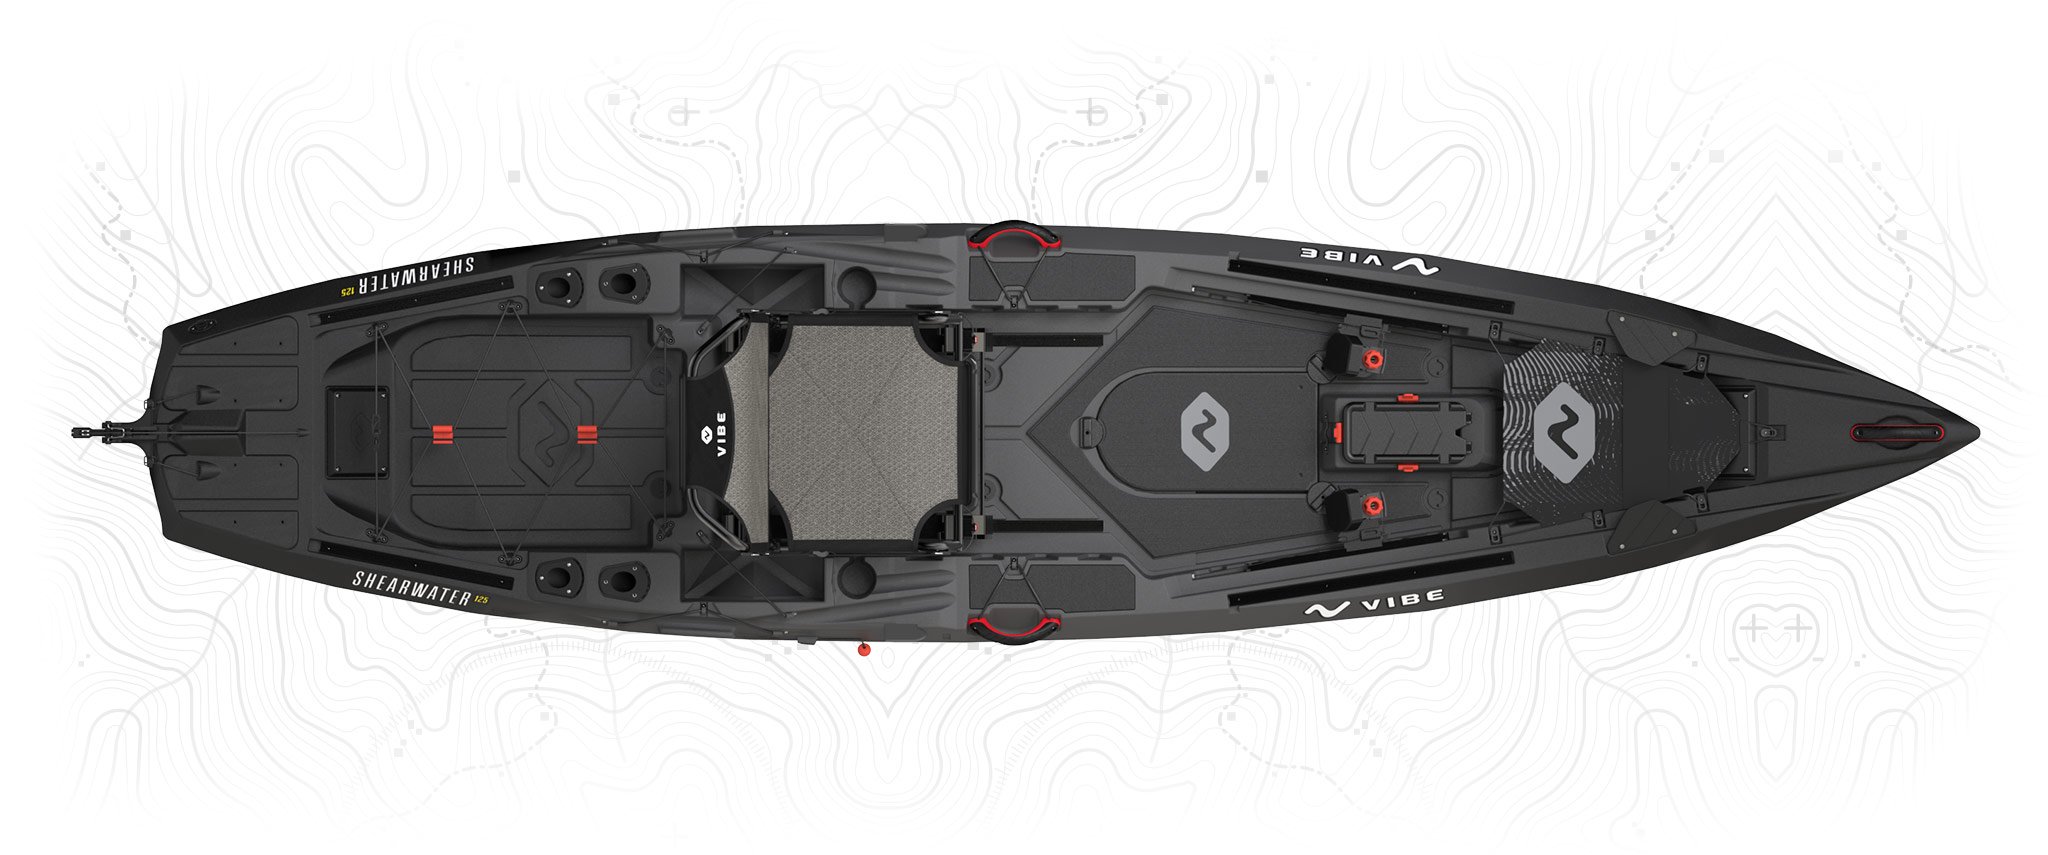 Vibe Shearwater 125 top view